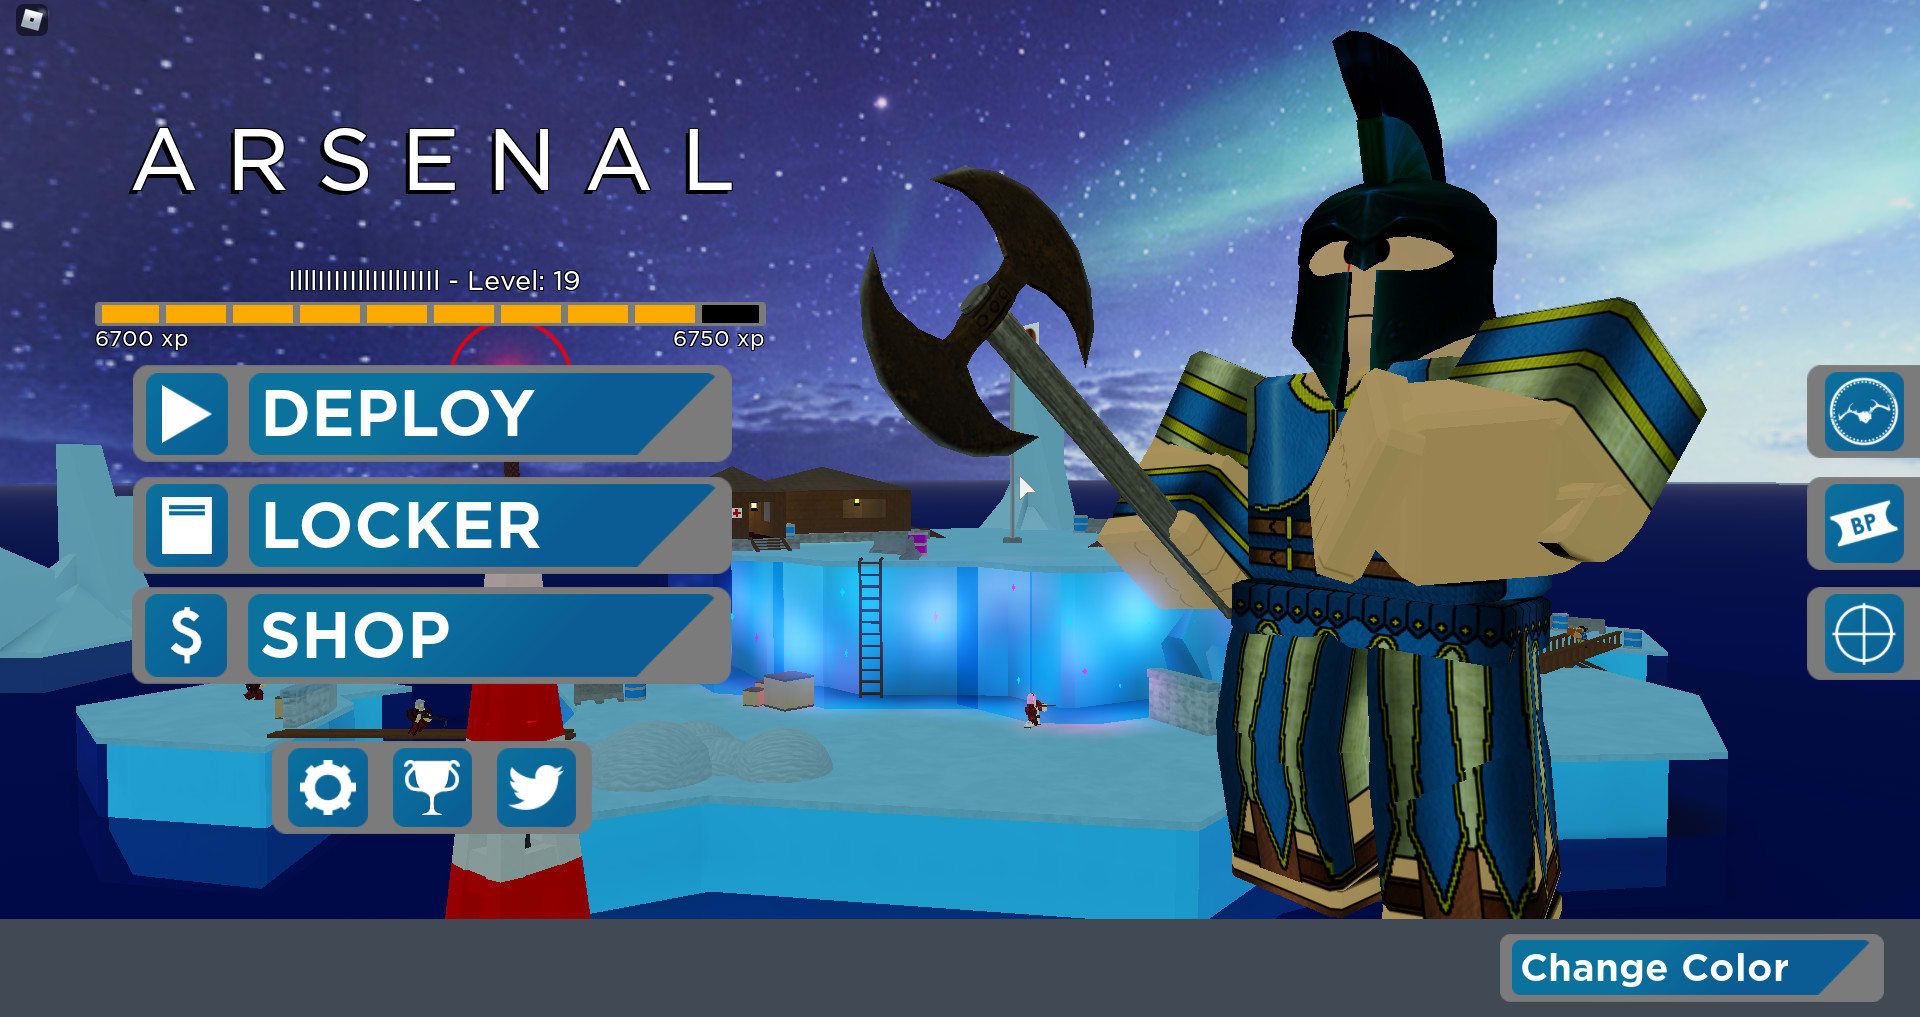 Boost Your Roblox Arsenal Account By Smilodon Gaming Fiverr - roblox com create account